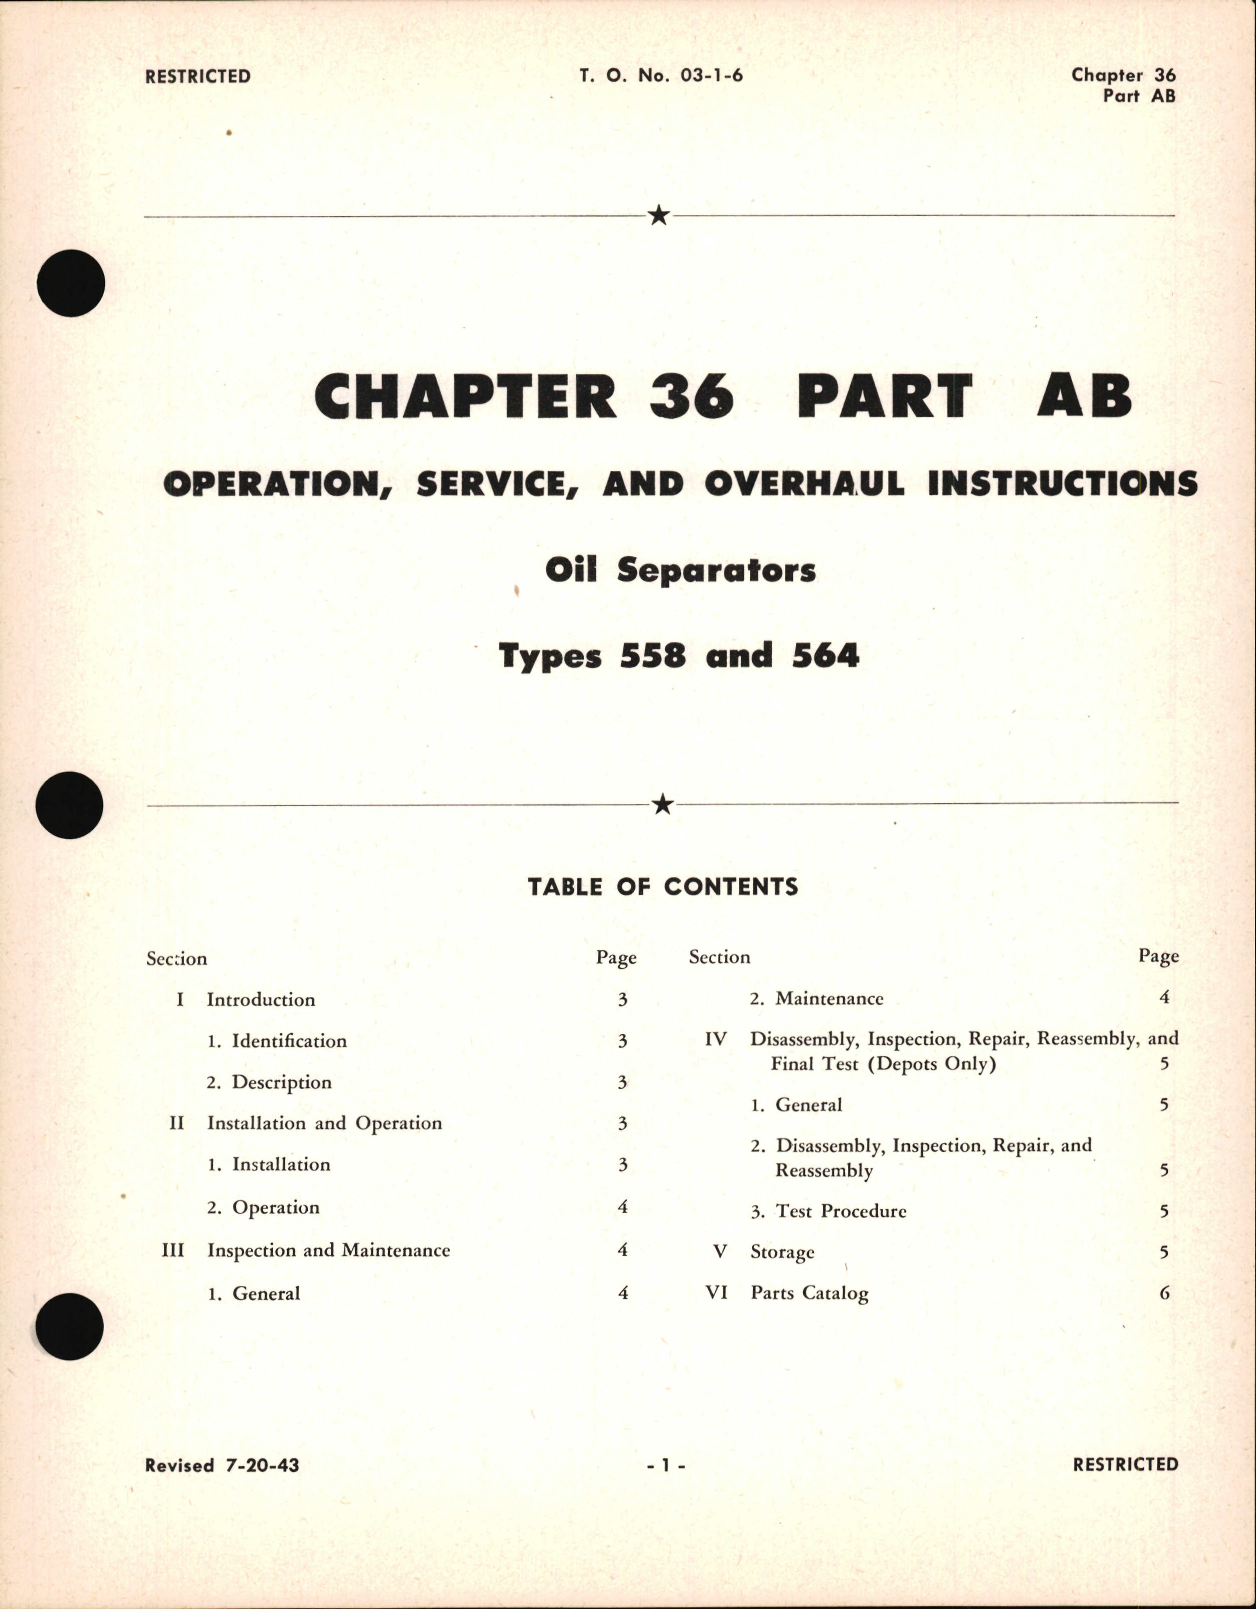 Sample page 1 from AirCorps Library document: Operation, Service, and Overhaul Instructions for Oil Separators, Chapter 36 Part AB